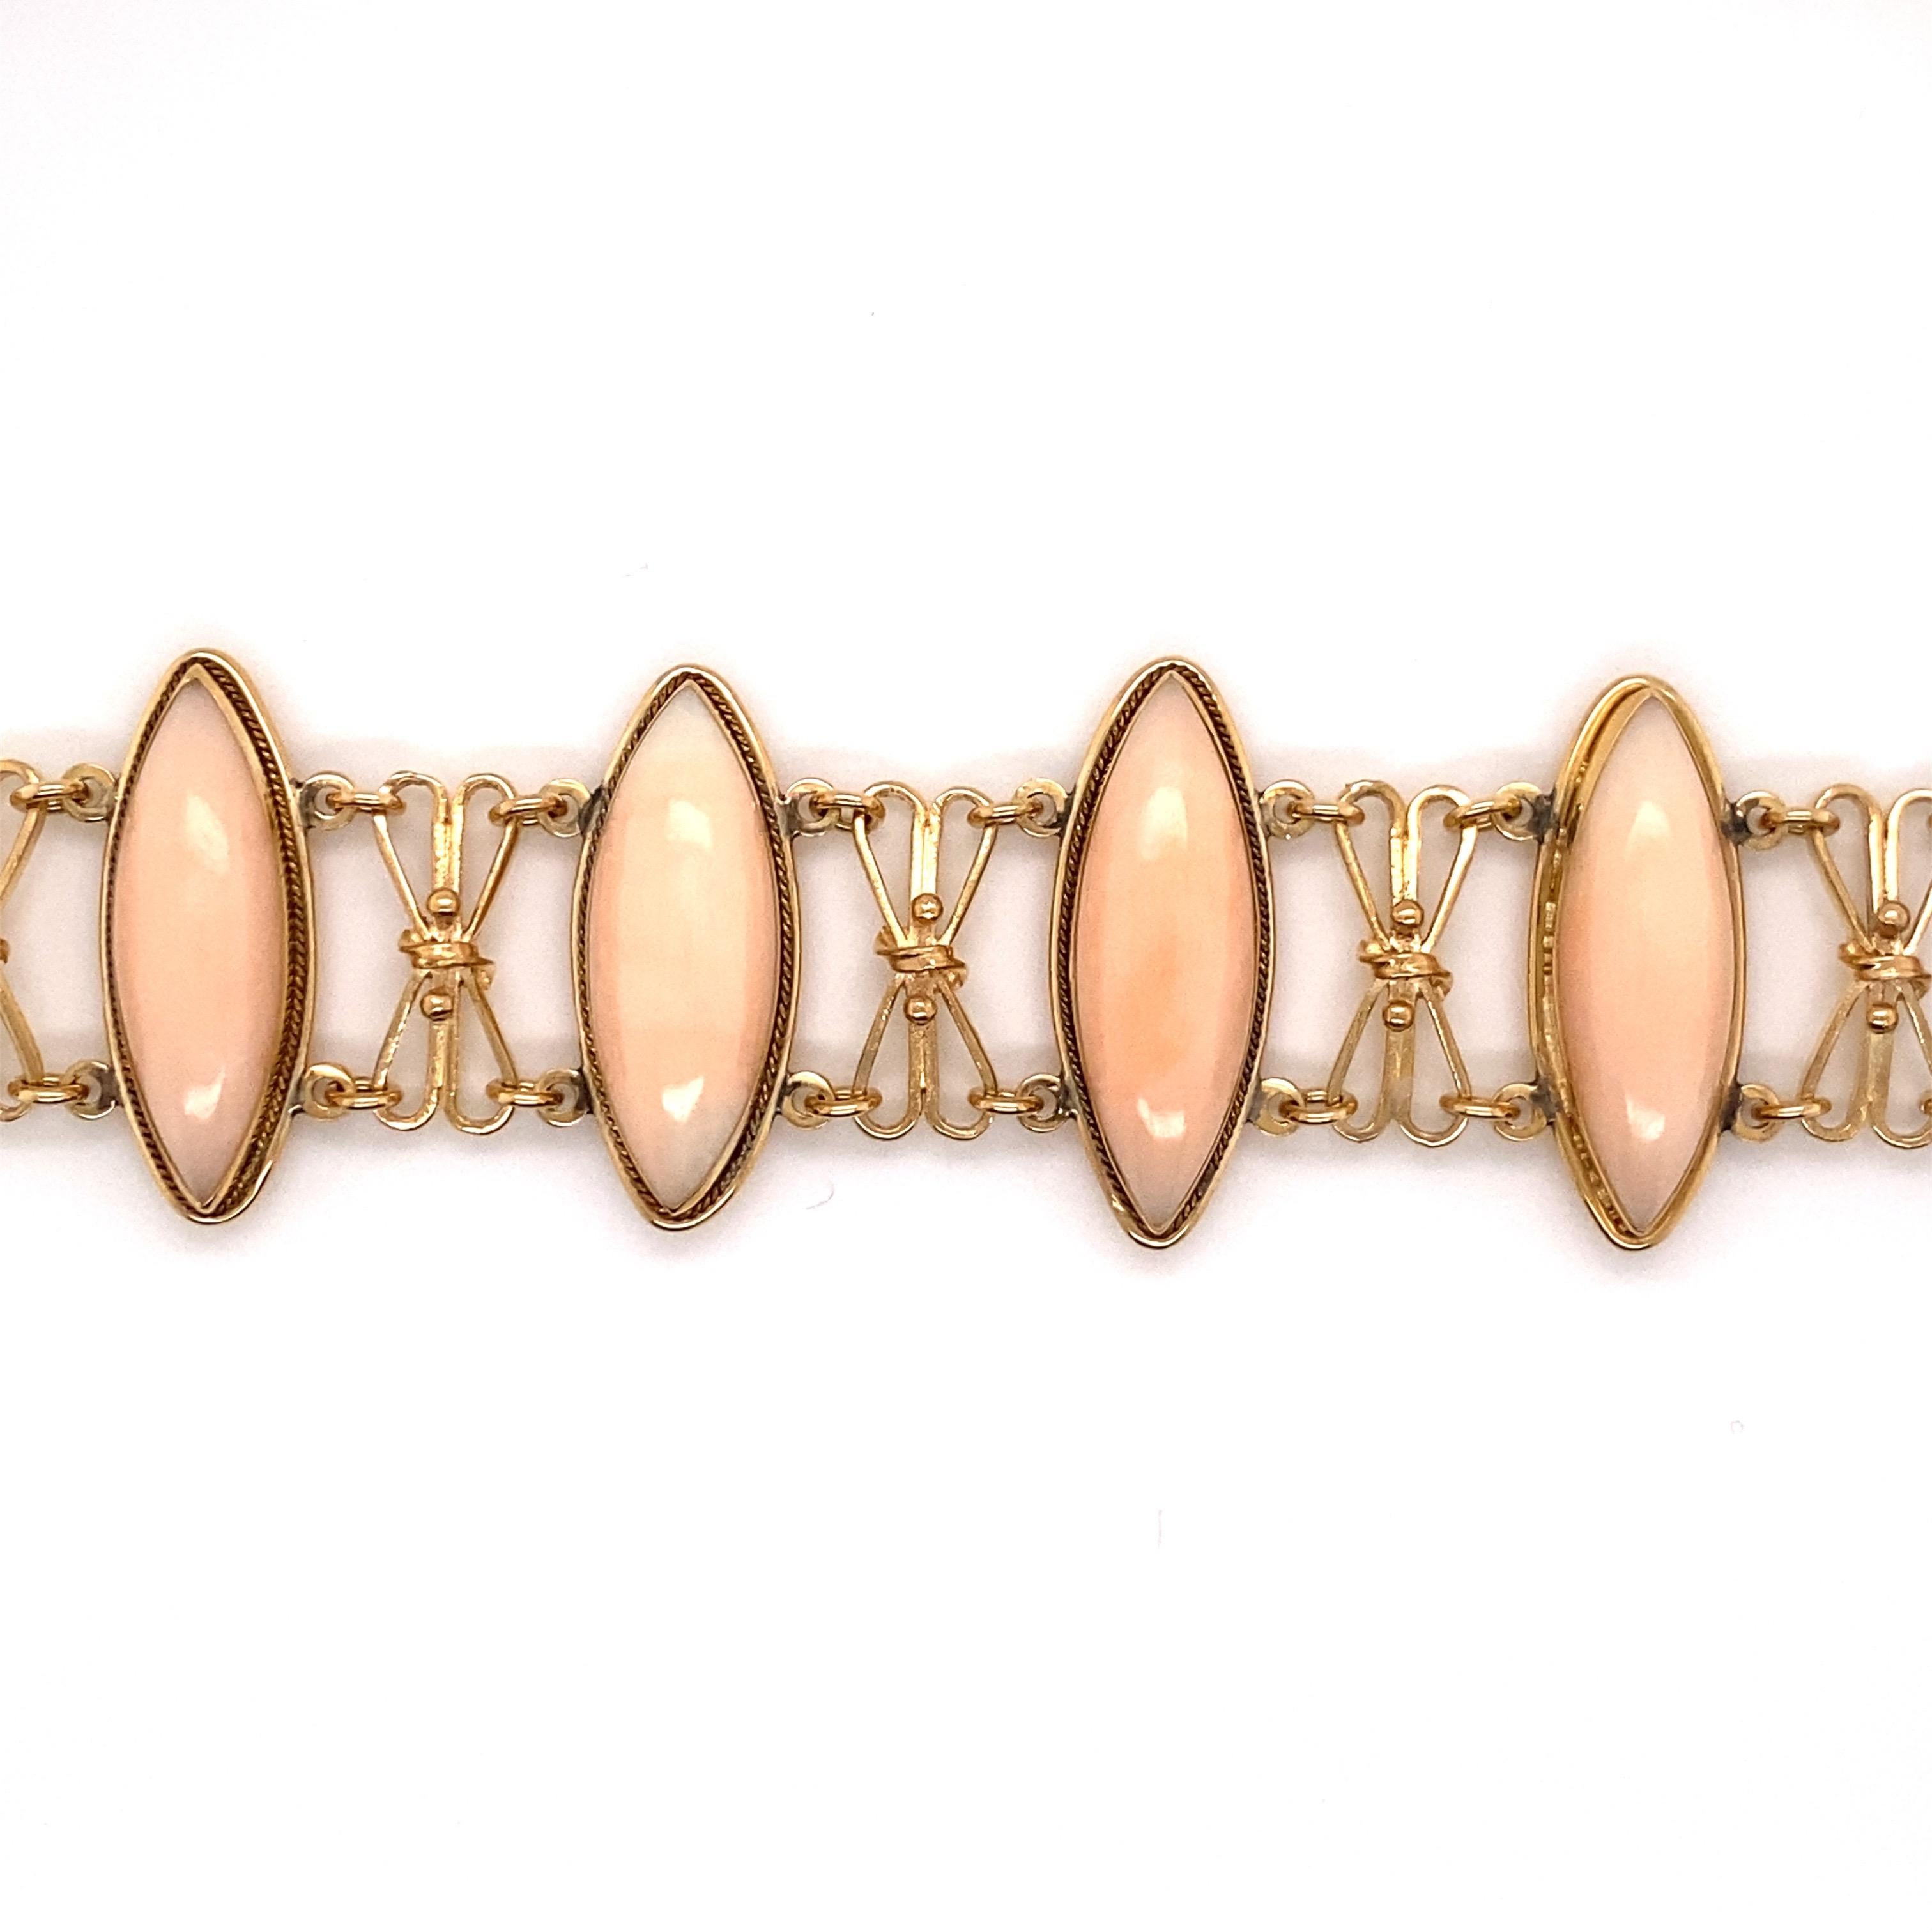 Vintage 1960s 14 Karat Yellow Gold Pink Coral Link Bracelet In Good Condition For Sale In Boston, MA